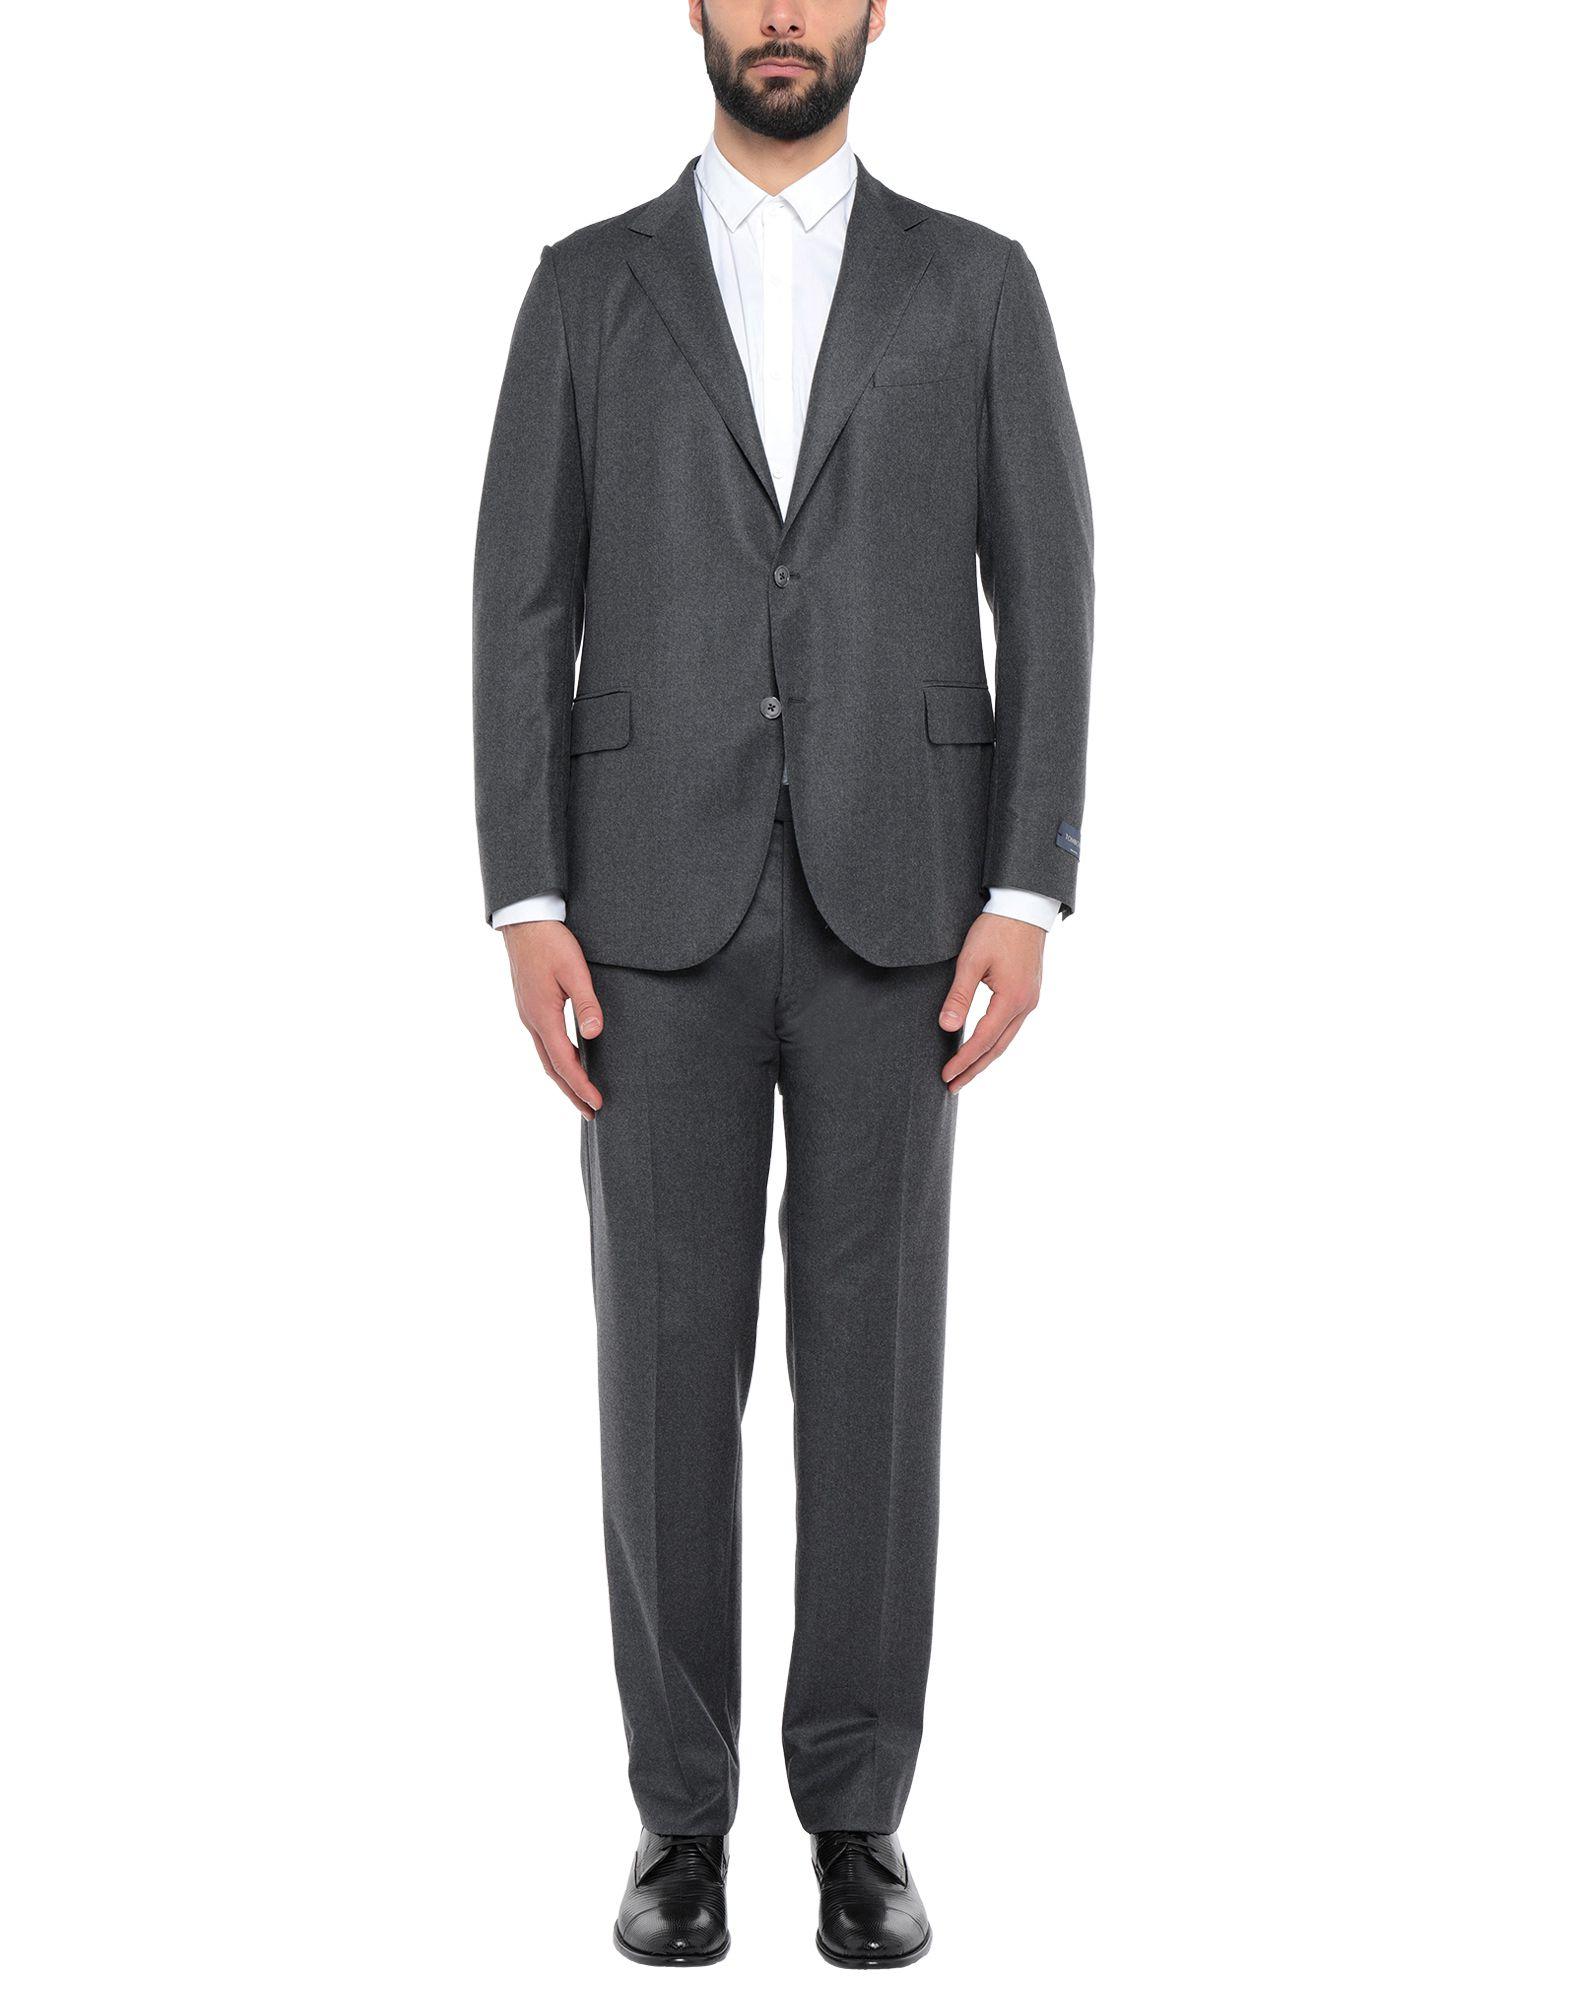 Tombolini Suit in Gray for Men - Lyst